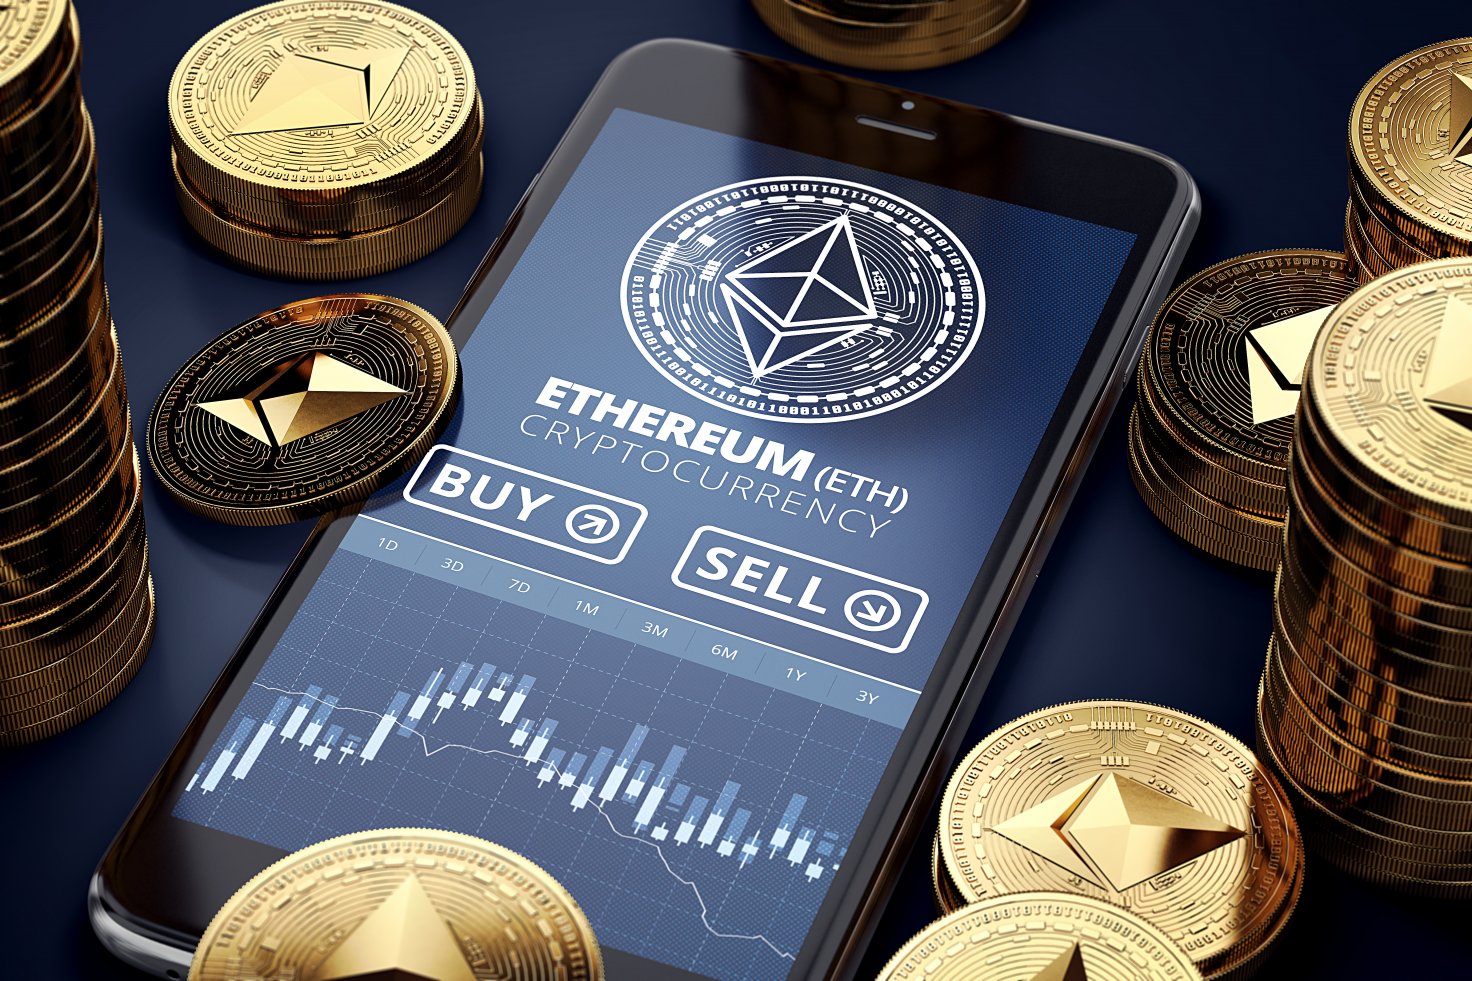 eth currency